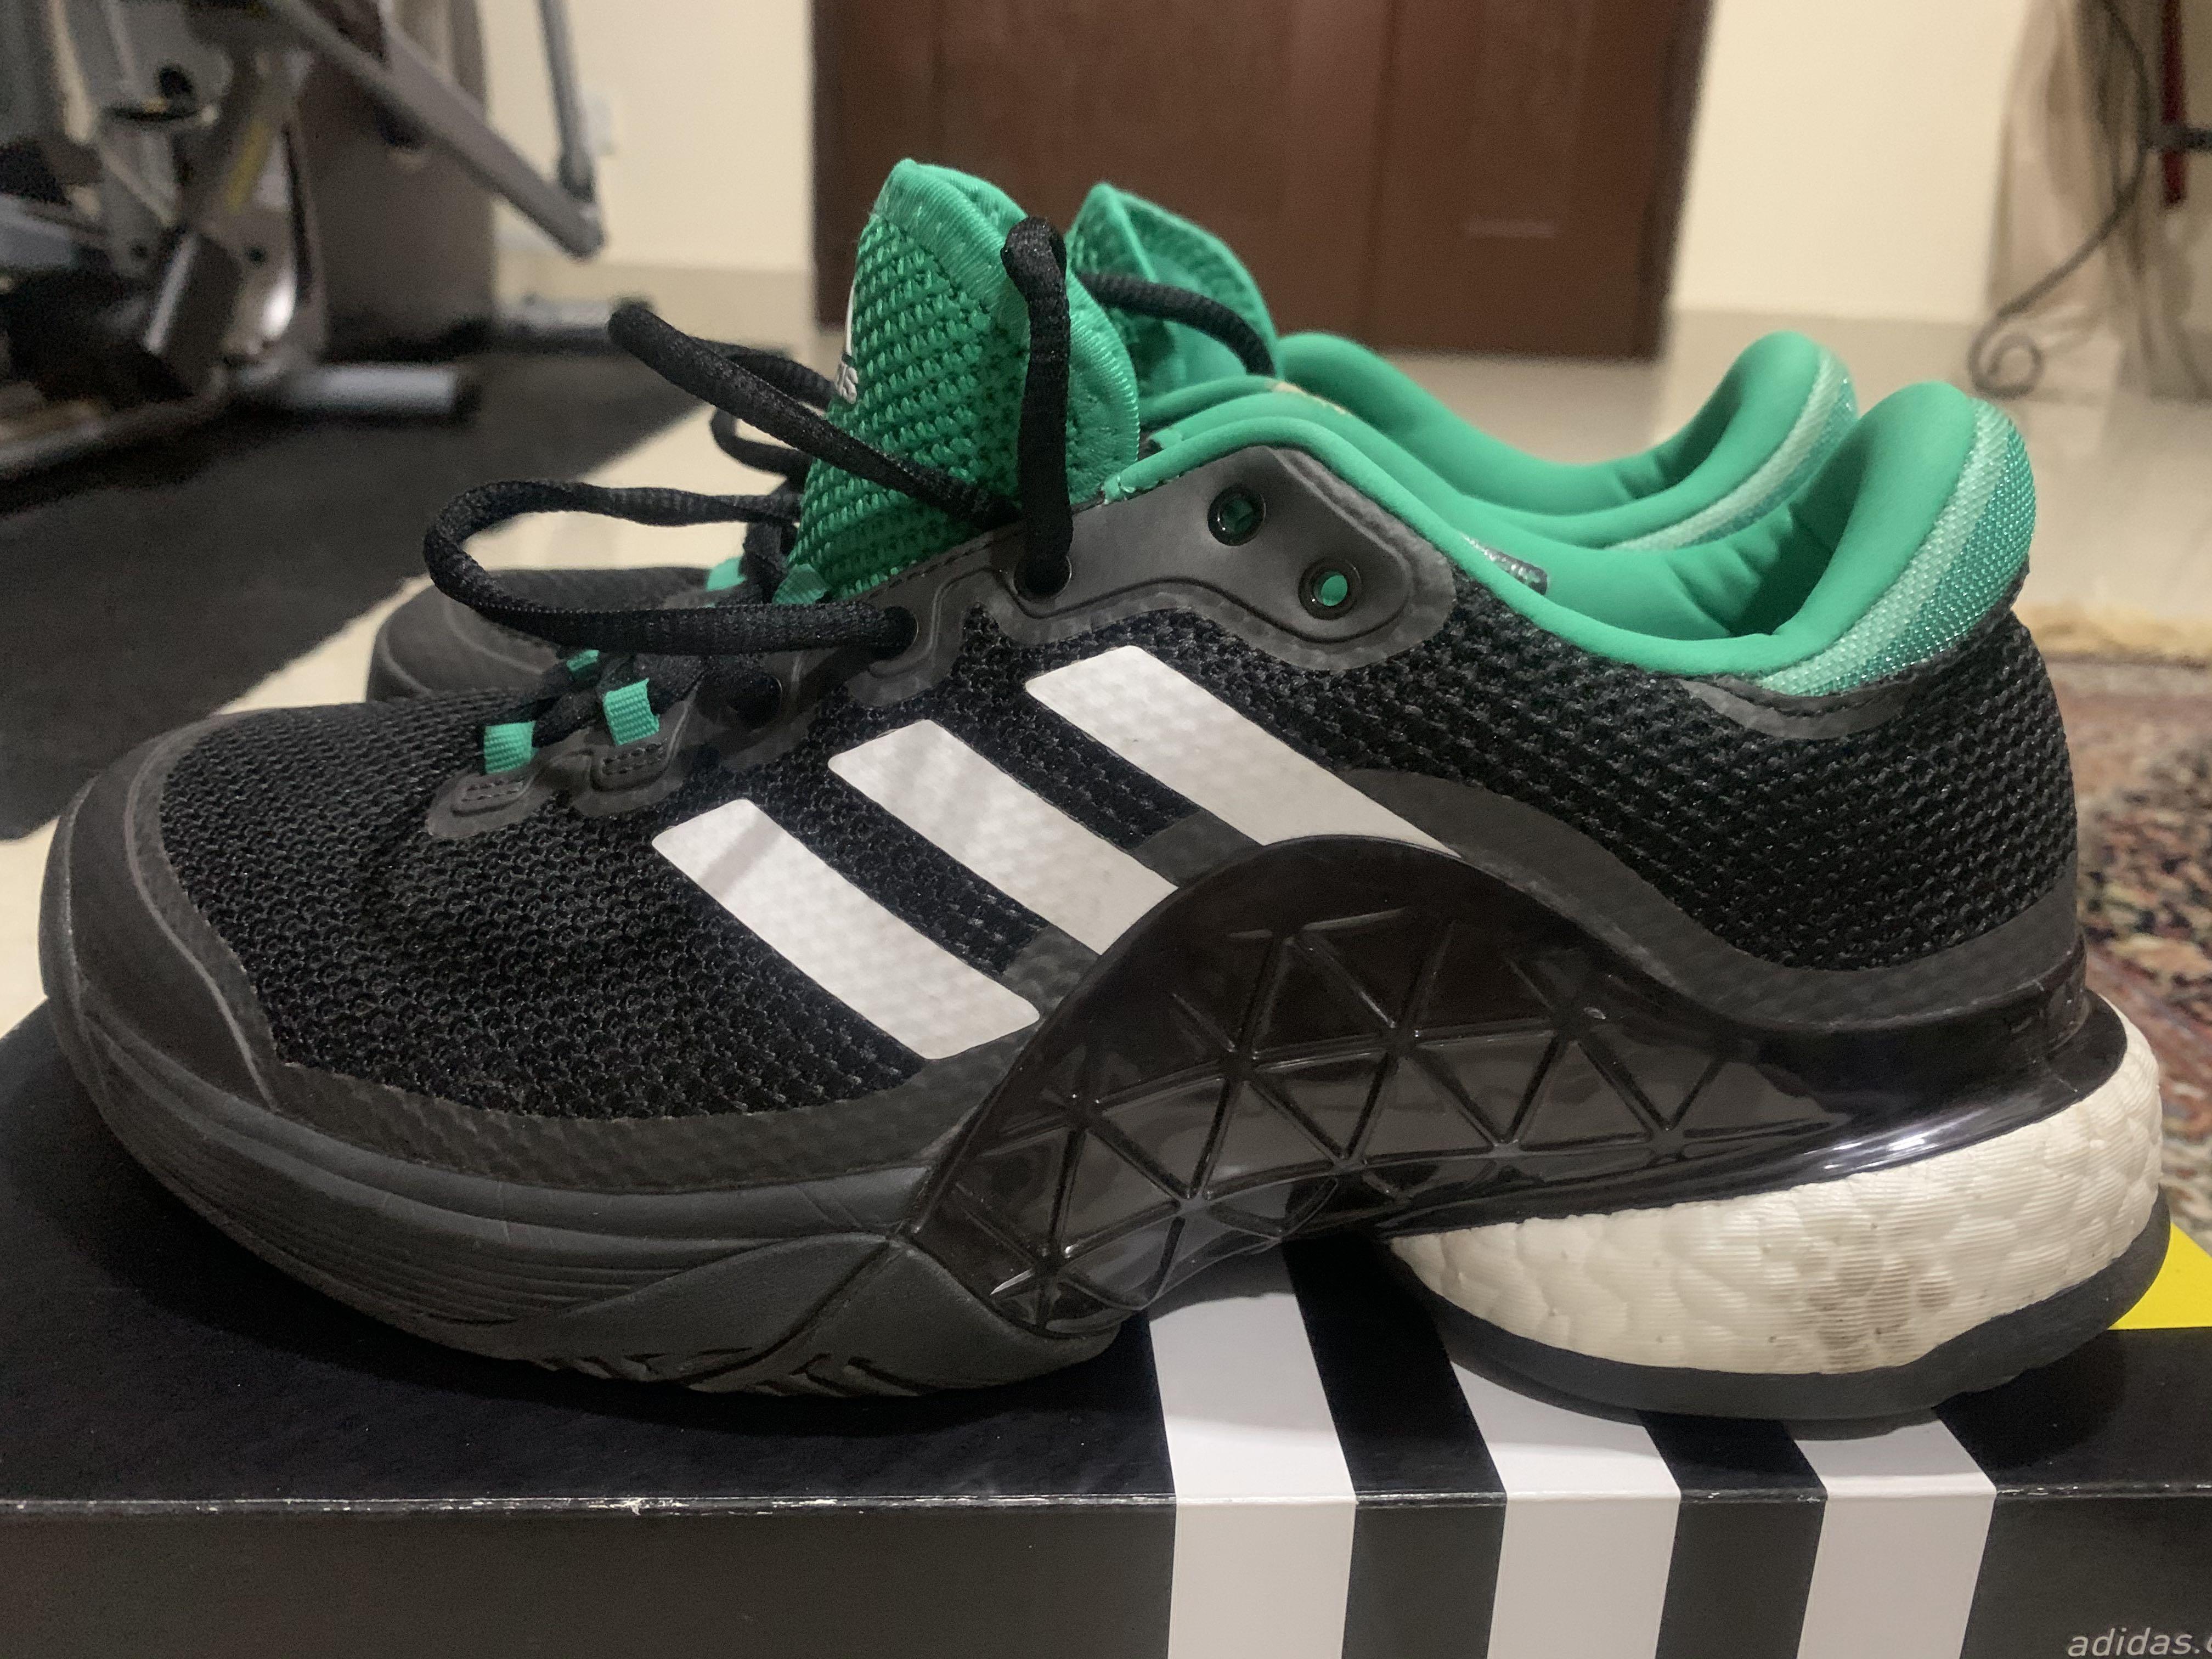 Adidas Barricade 2017 Boost Tennis Shoes, Sports Equipment, Sports & Games, Racket Sports on Carousell